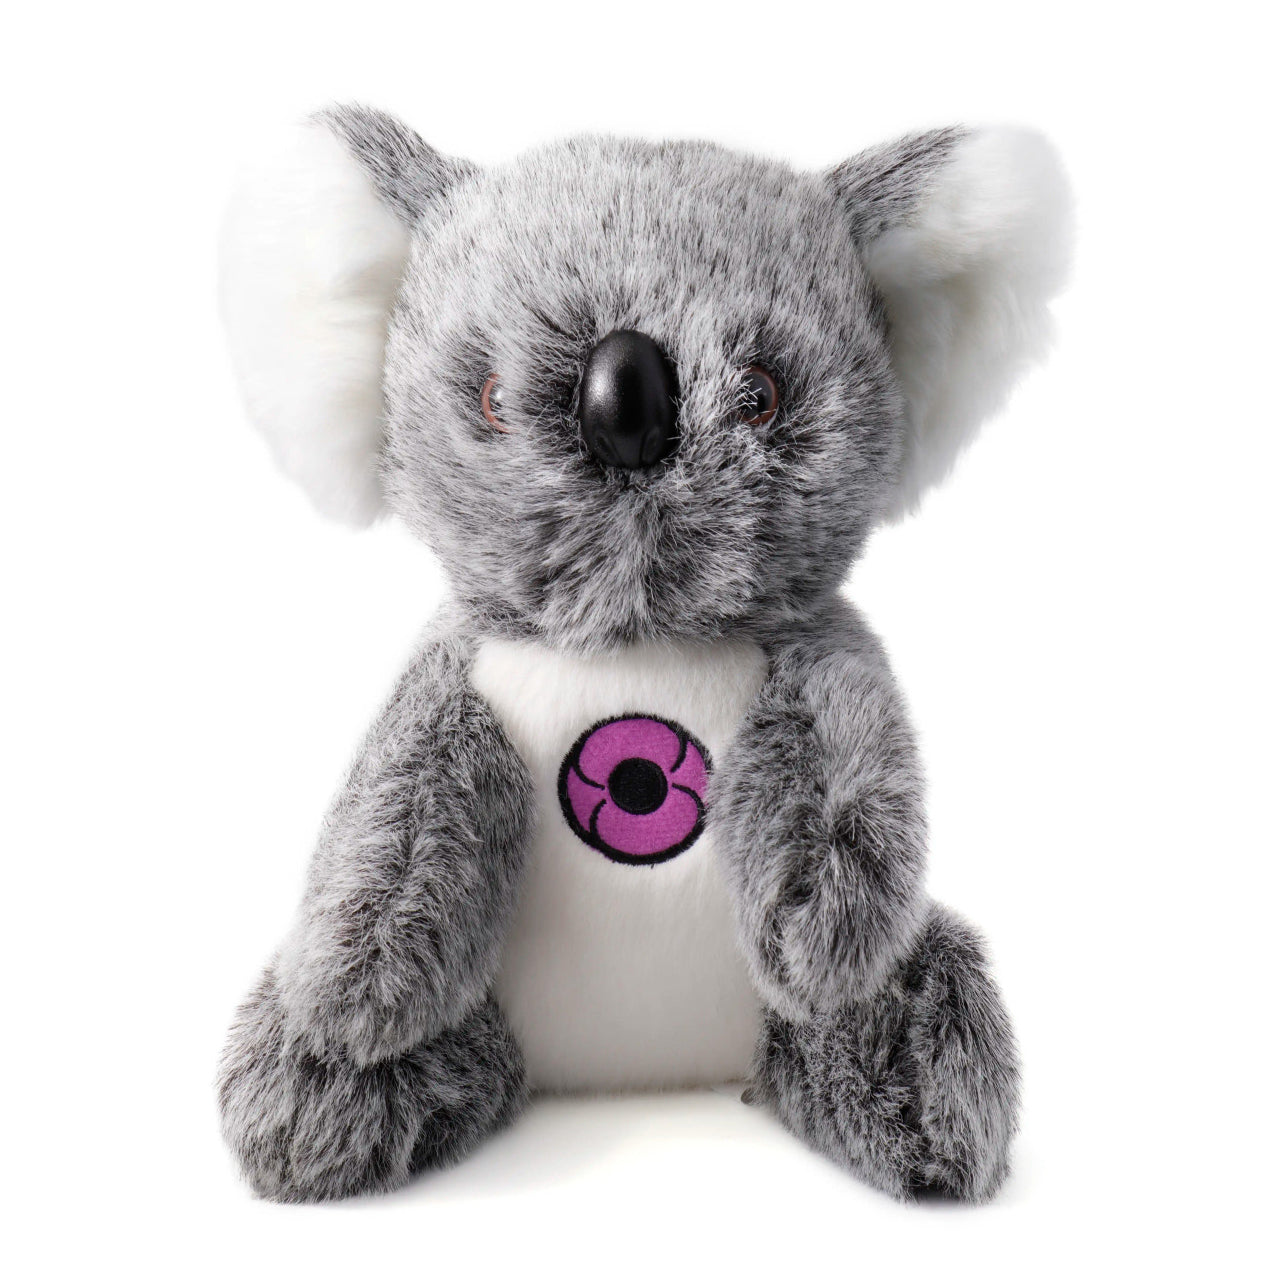 The Blinky Purple Poppy Koala Bear is the perfect companion for your little one. This adorable plush toy not only adds charm to any toy collection but also provides comfort and warmth to children. www.defenceqstore.com.au